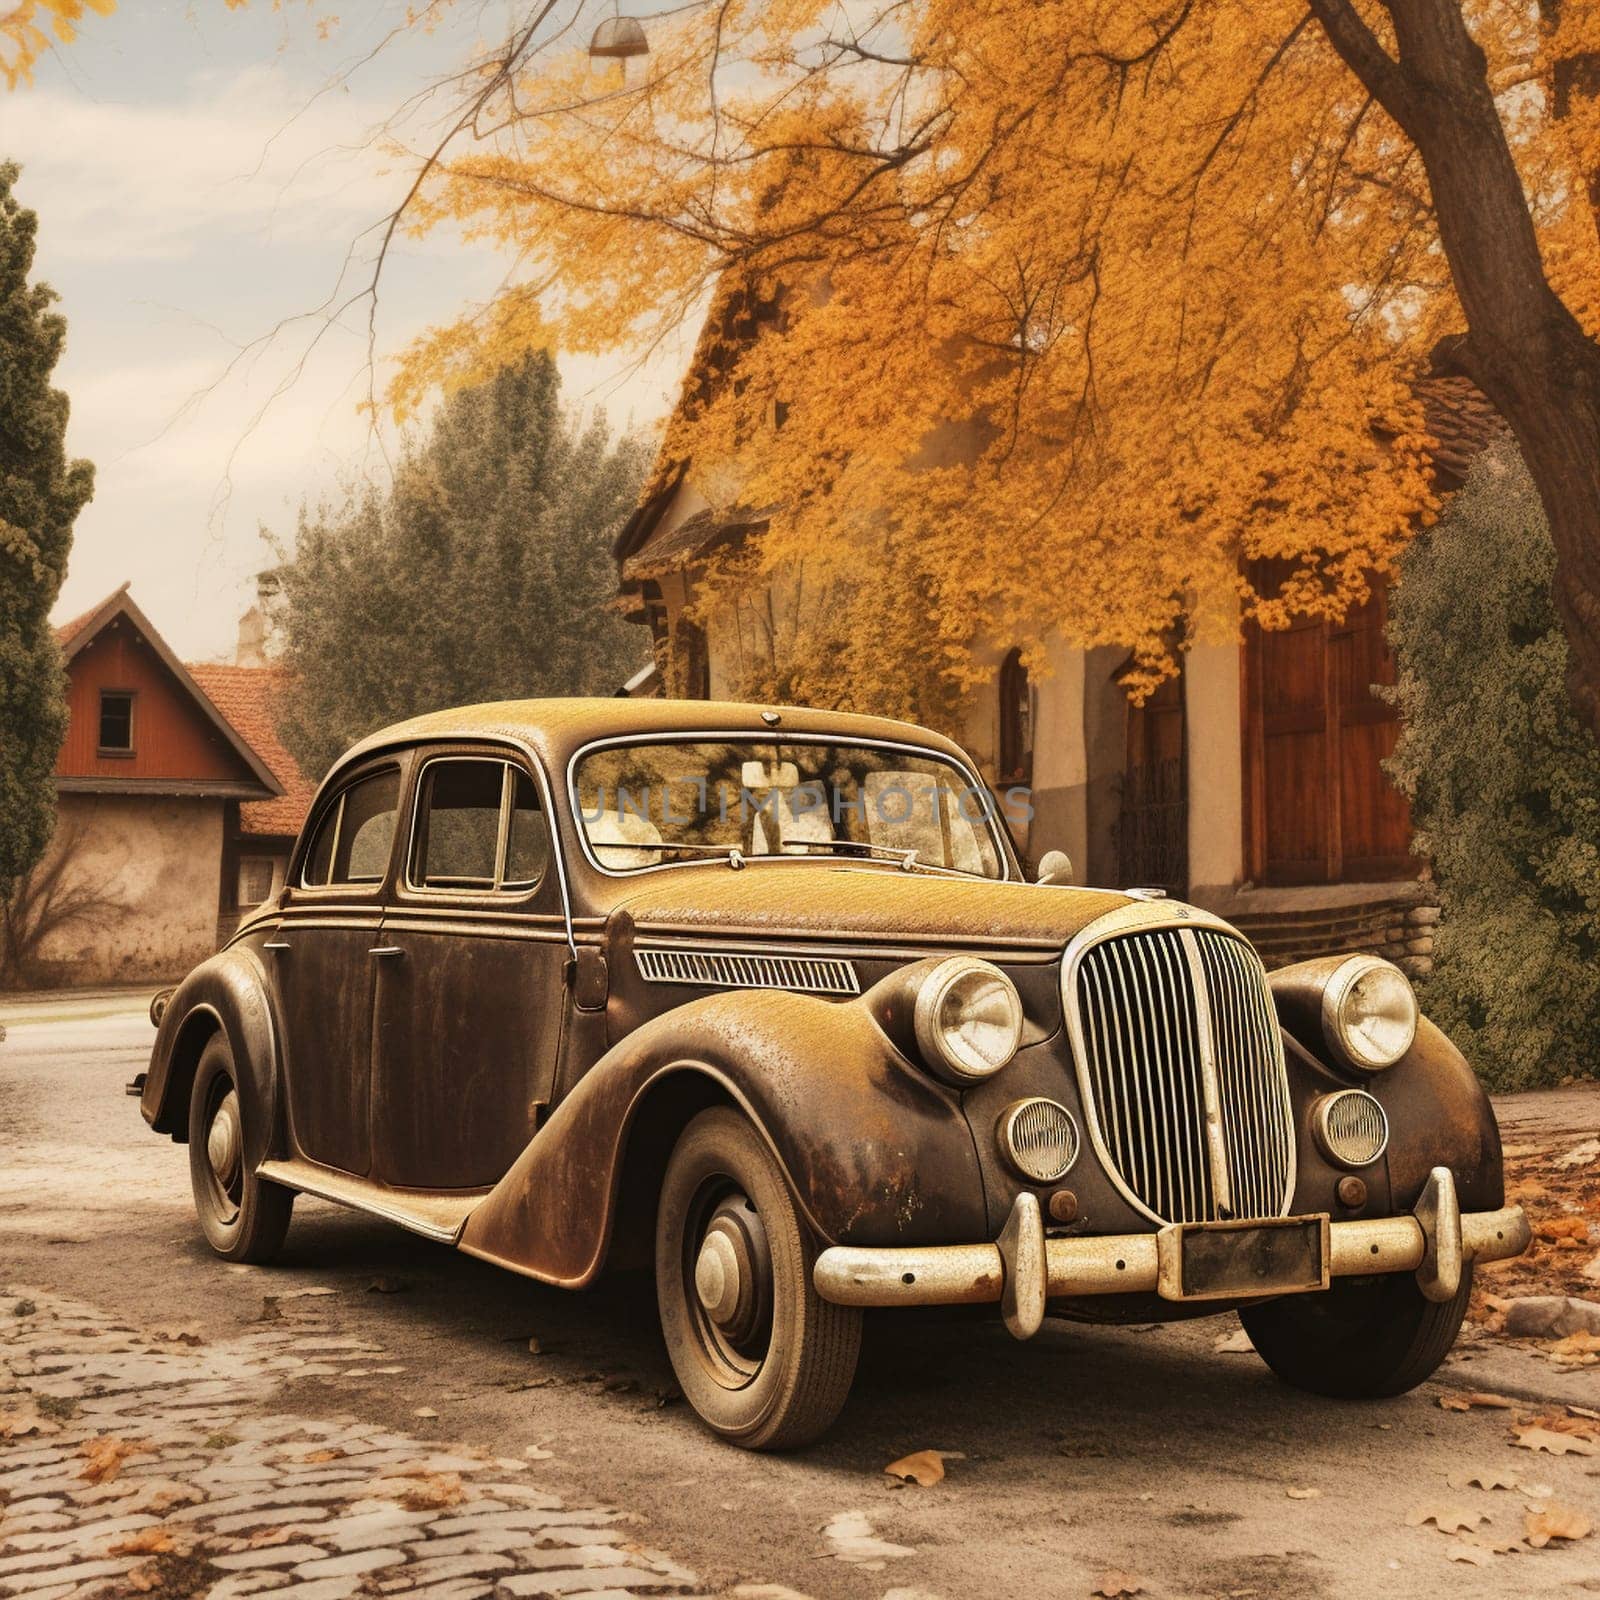 Step into the past with this captivating image of a vintage car in a nostalgic art style, capturing the essence of its bygone era. The vintage car is portrayed against a scenic backdrop, resembling a serene countryside road or a vintage city street with quaint buildings. The image exudes a warm, sepia-toned ambiance, enhancing the perception of nostalgia.